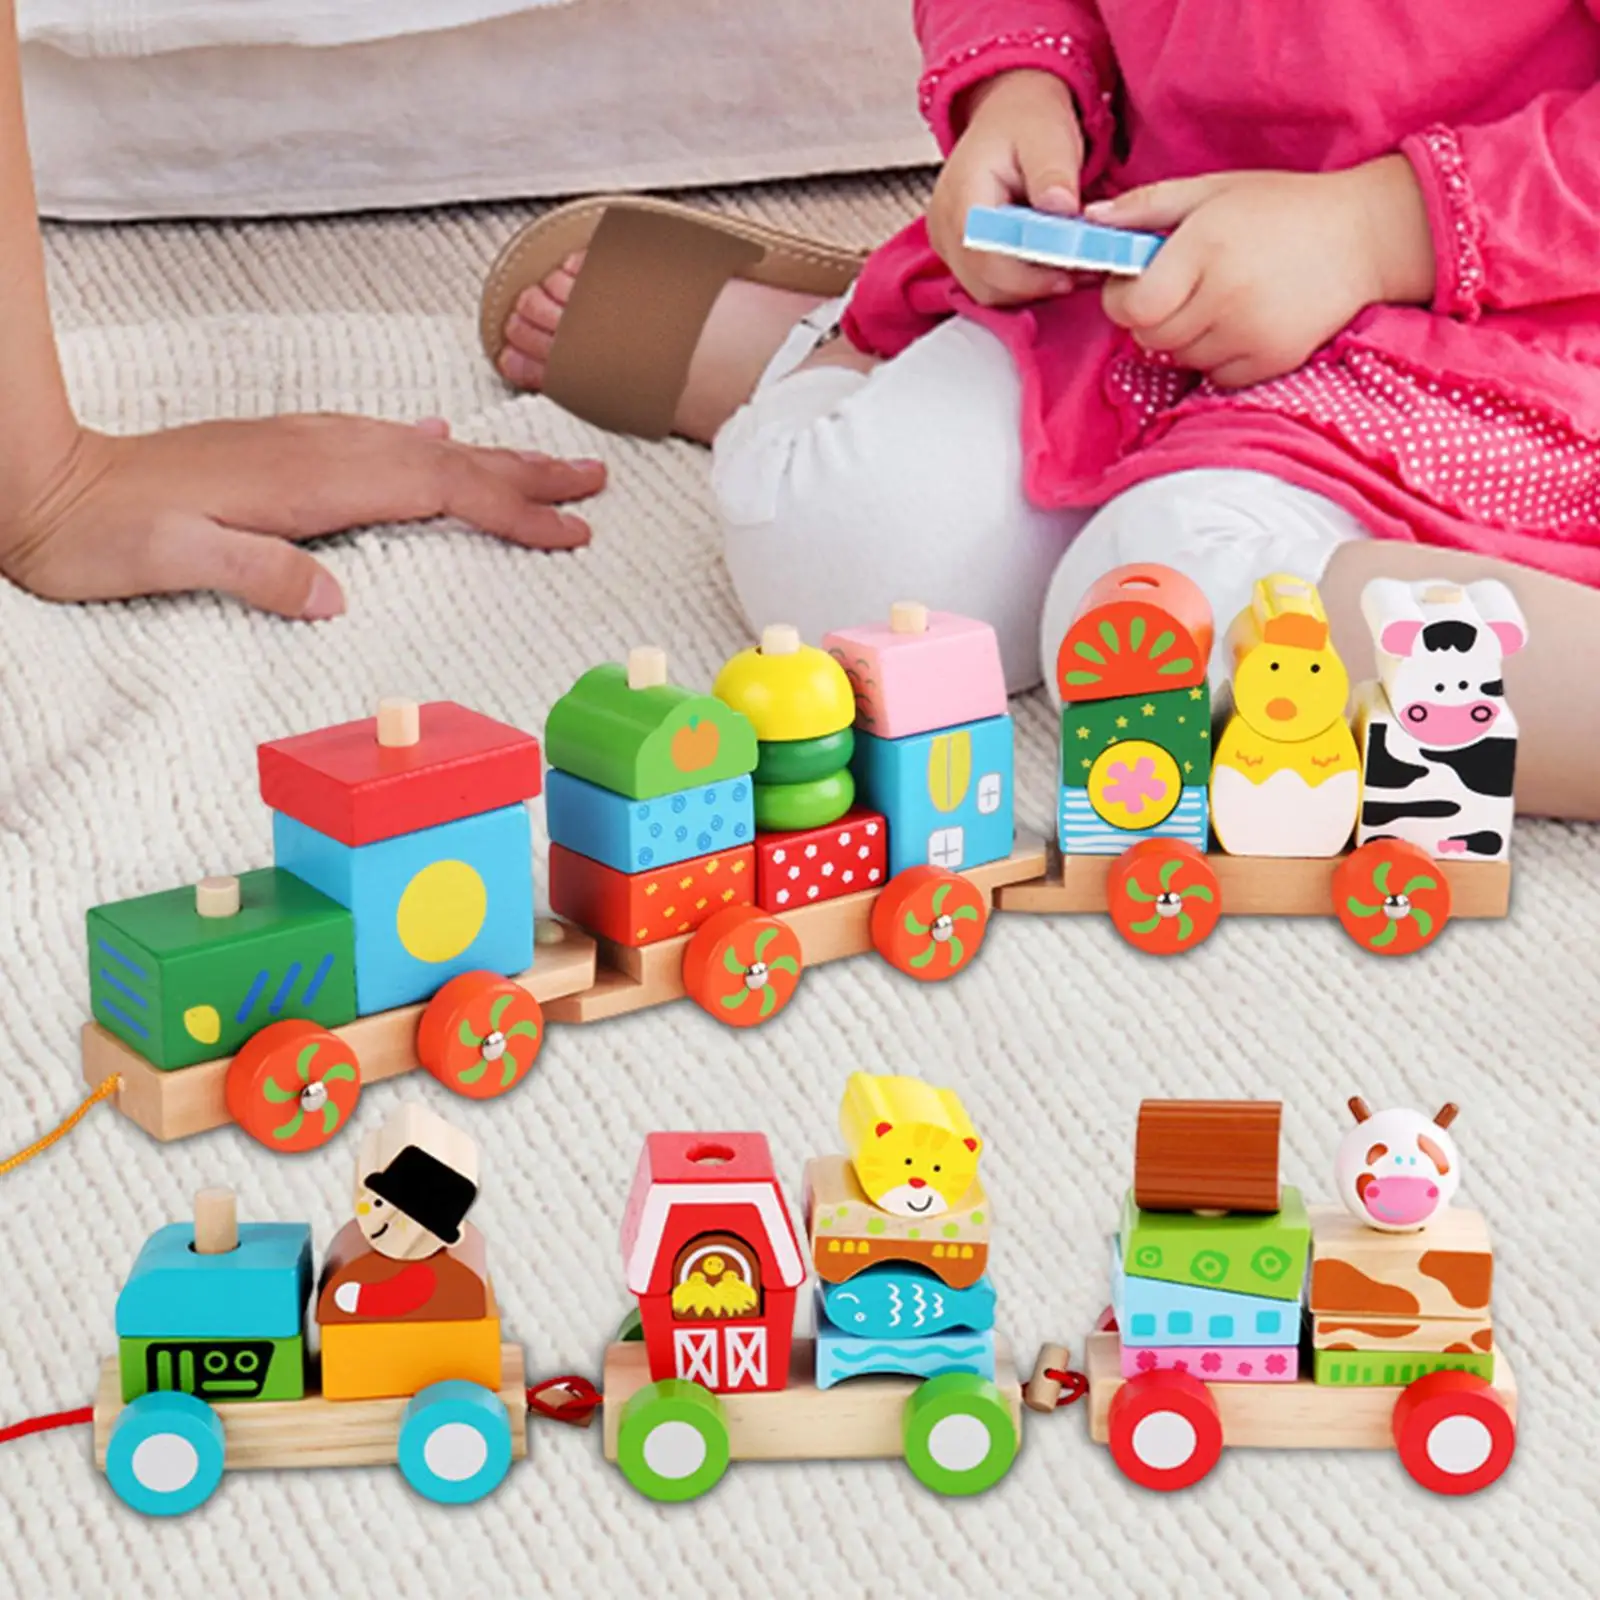 Wooden Small Trains, Smooth Attractive Fun Classic Wooden Toy,Baby Toys Wood Train, for Kids